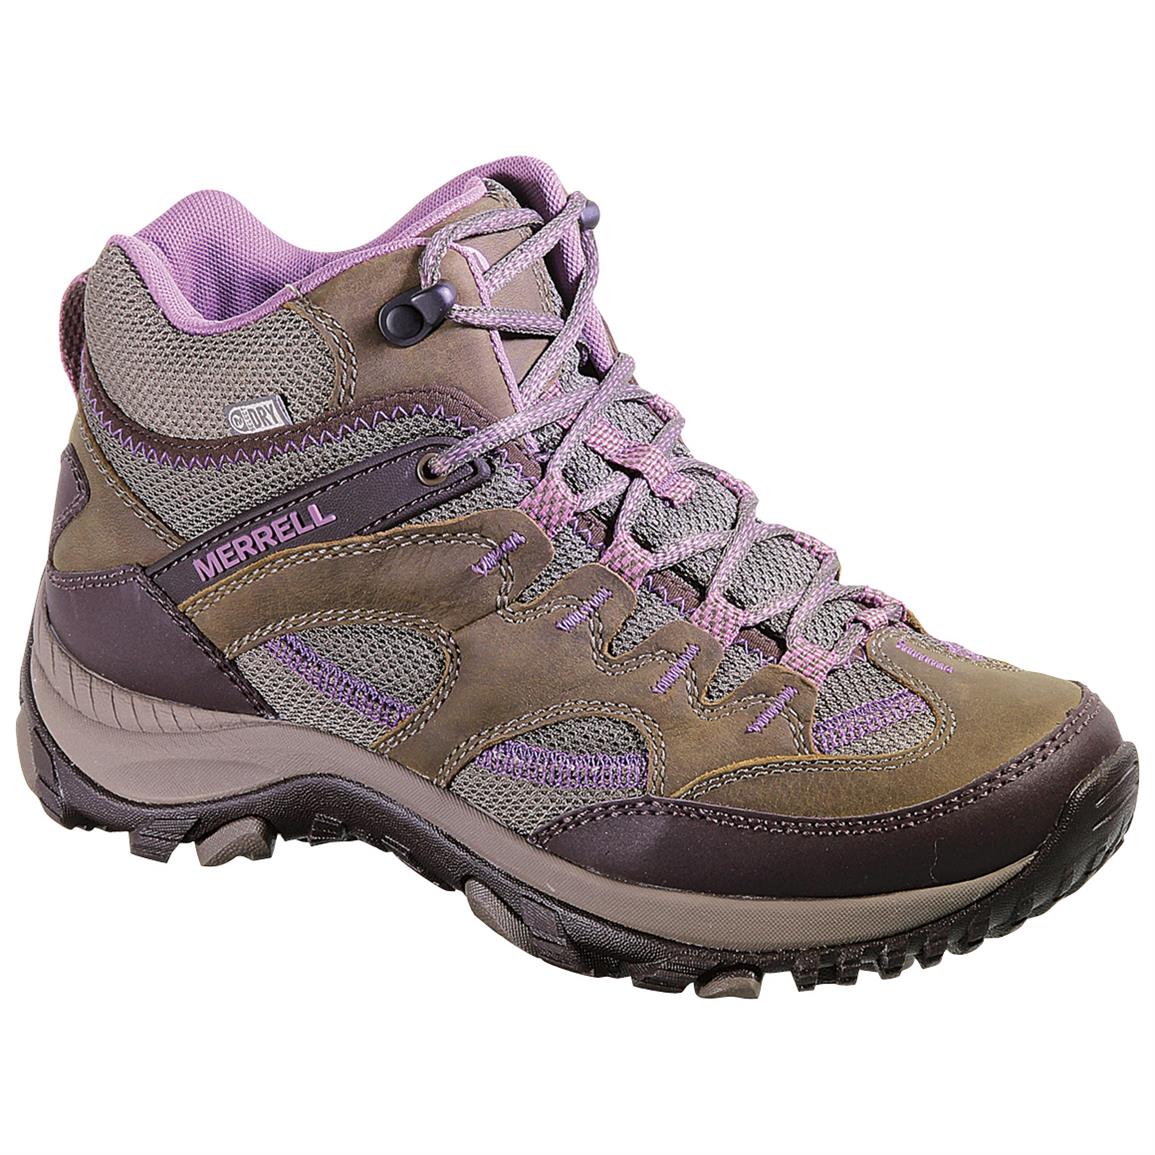 Women's Merrell Salida Mid Waterproof Hiking Boots - 617460, Hiking Boots & Shoes at Sportsman's 